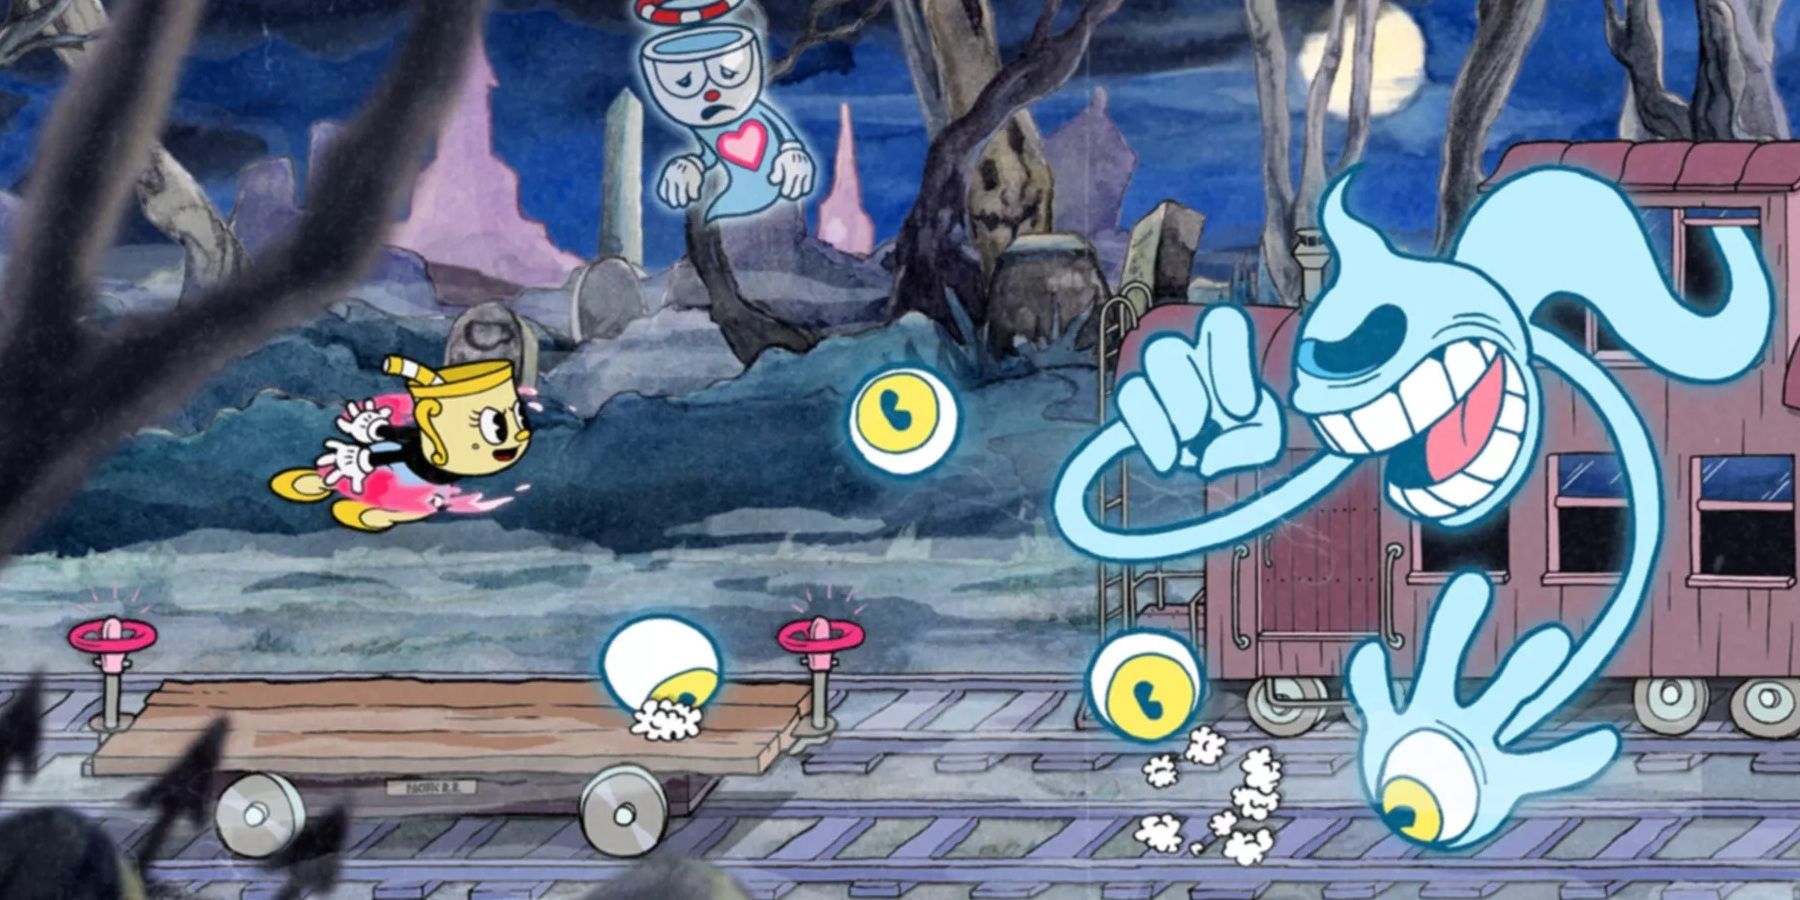 Studio MDHR, the developer of Cuphead, comments on their future plans